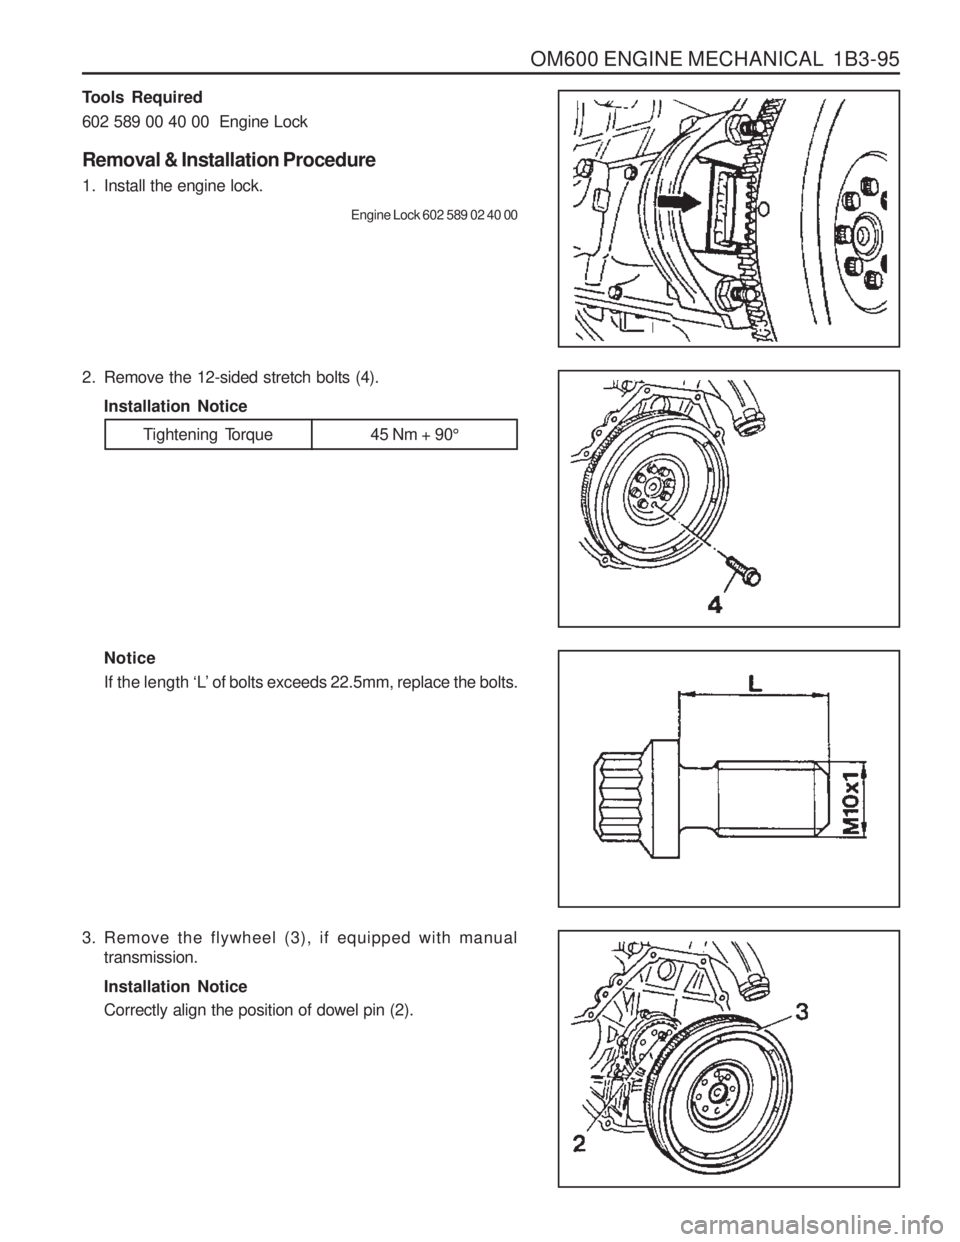 SSANGYONG MUSSO 2003  Service Manual OM600 ENGINE MECHANICAL  1B3-95
3. Remove the flywheel (3), if equipped with manualtransmission. Installation Notice Correctly align the position of dowel pin (2).
Tools Required 602 589 00 40 00  Eng